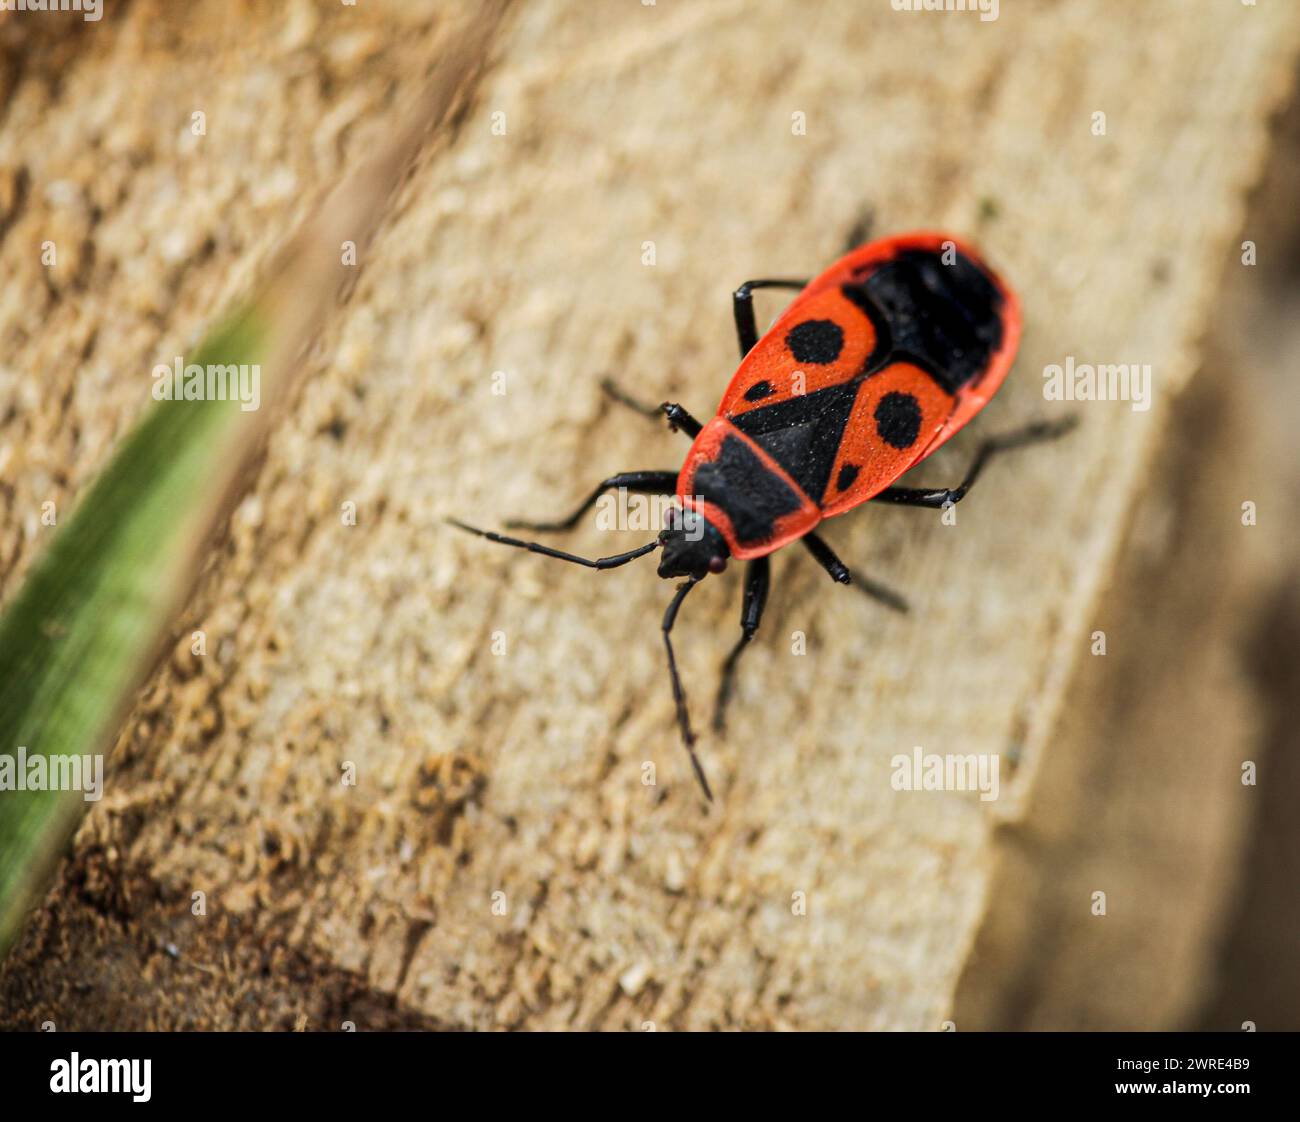 European firebug Pyrrhocoris apterus. Red and black adult insect in macro details. High quality photo Stock Photo